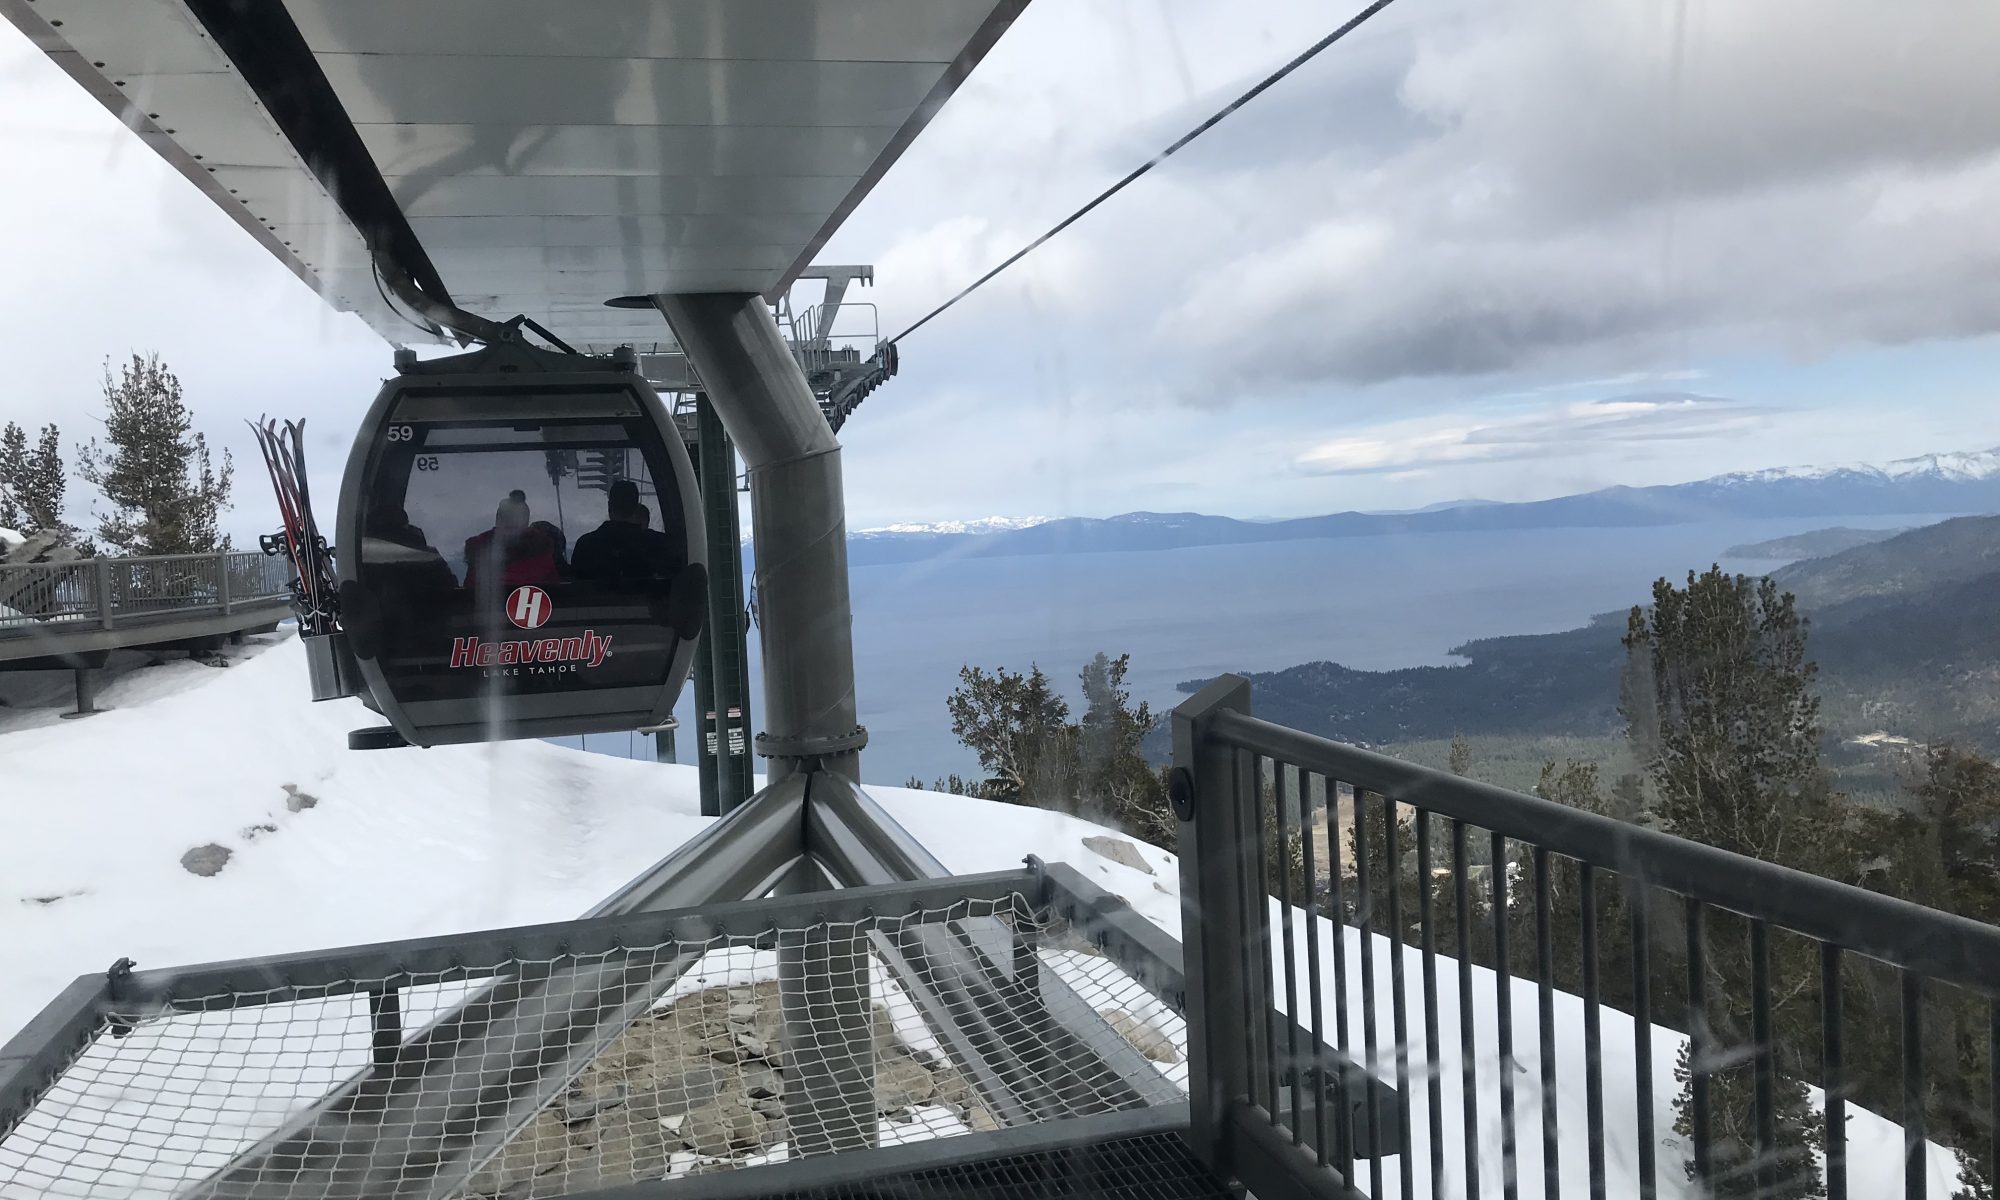 Heavenly gondola. Photo by: The-Ski-Guru. Heavenly is another of the resorts that will roll out Emma later this season. Emma, the World's First Digital Mountain Assistant, Kicks Off the 2018-19 Winter Season in Beta at Keystone Ski Resort.